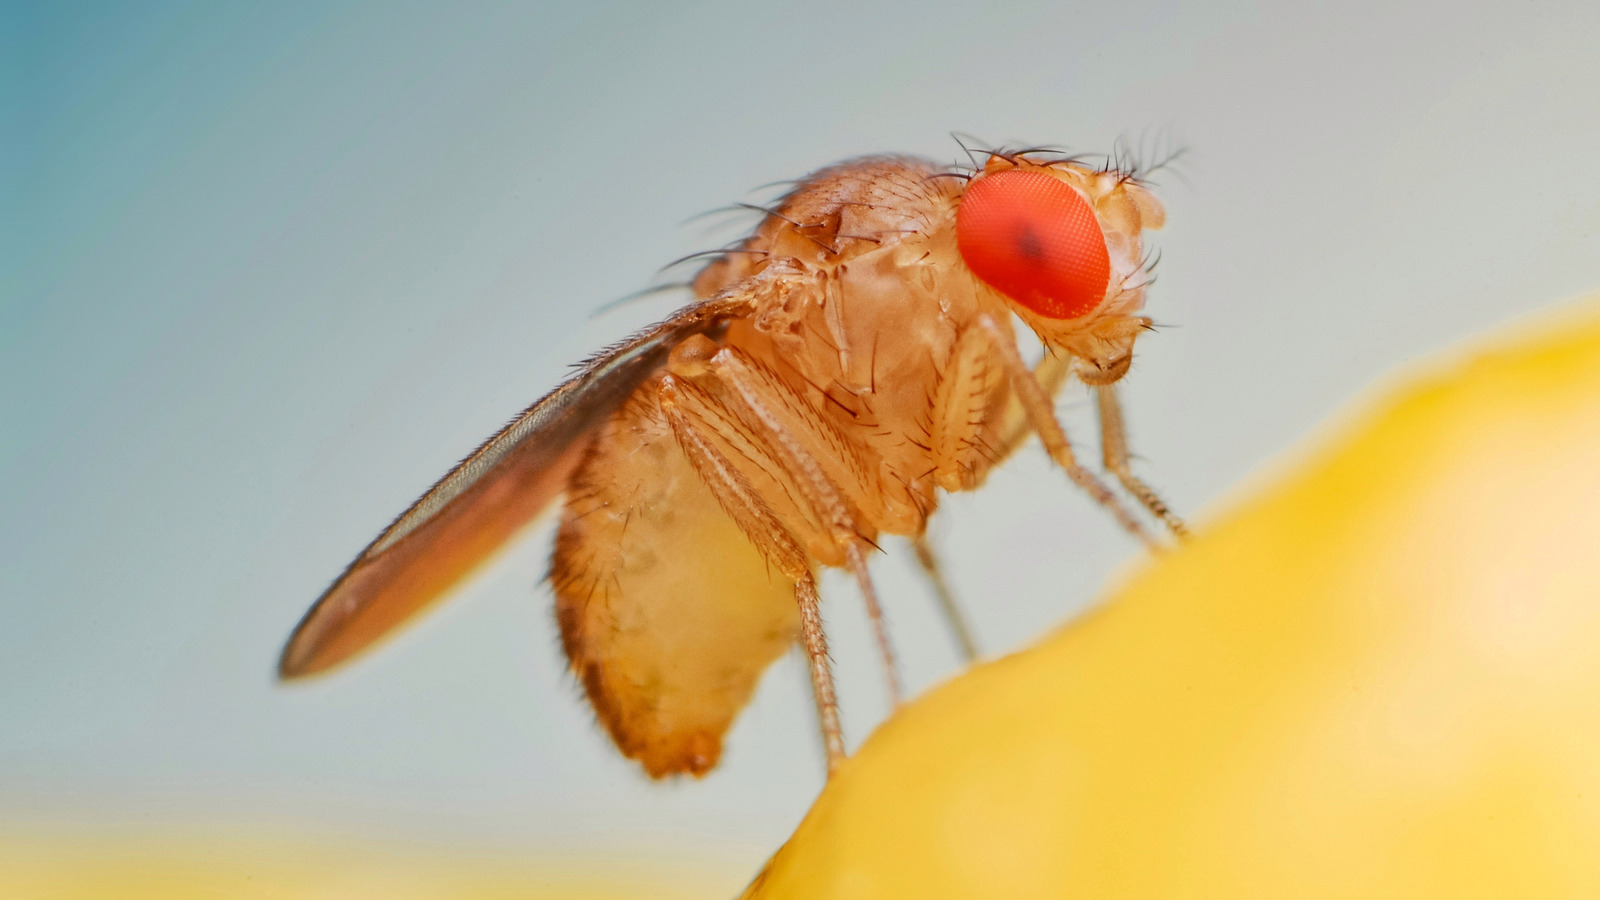 Fruit Fly Facts, Get Rid of Fruit Flies in the House